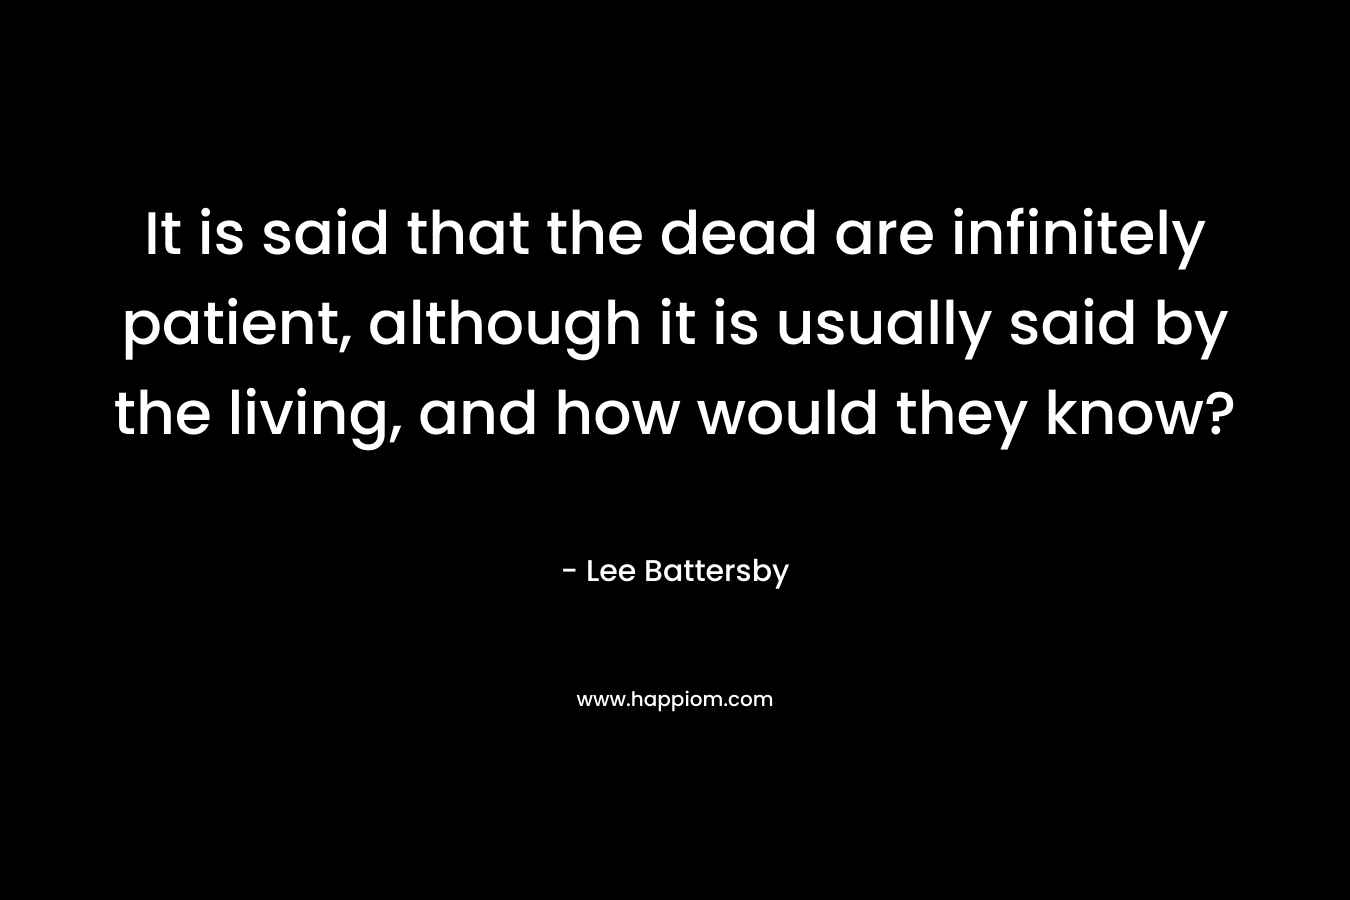 It is said that the dead are infinitely patient, although it is usually said by the living, and how would they know?